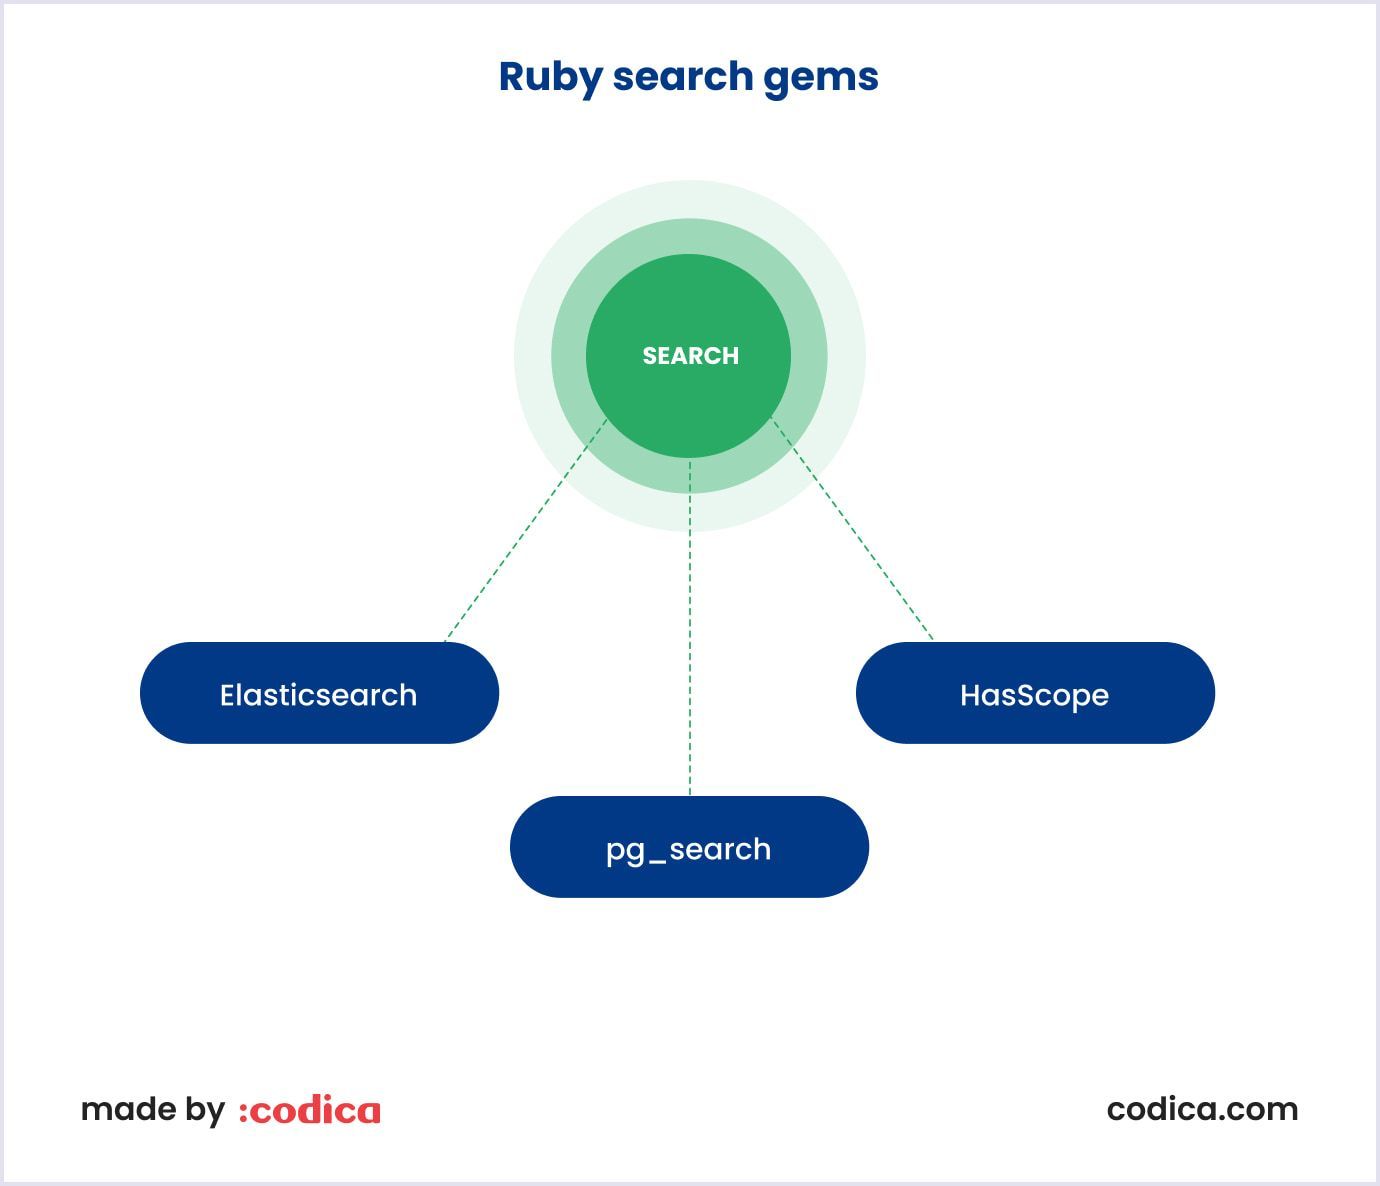 Best Ruby gems for search